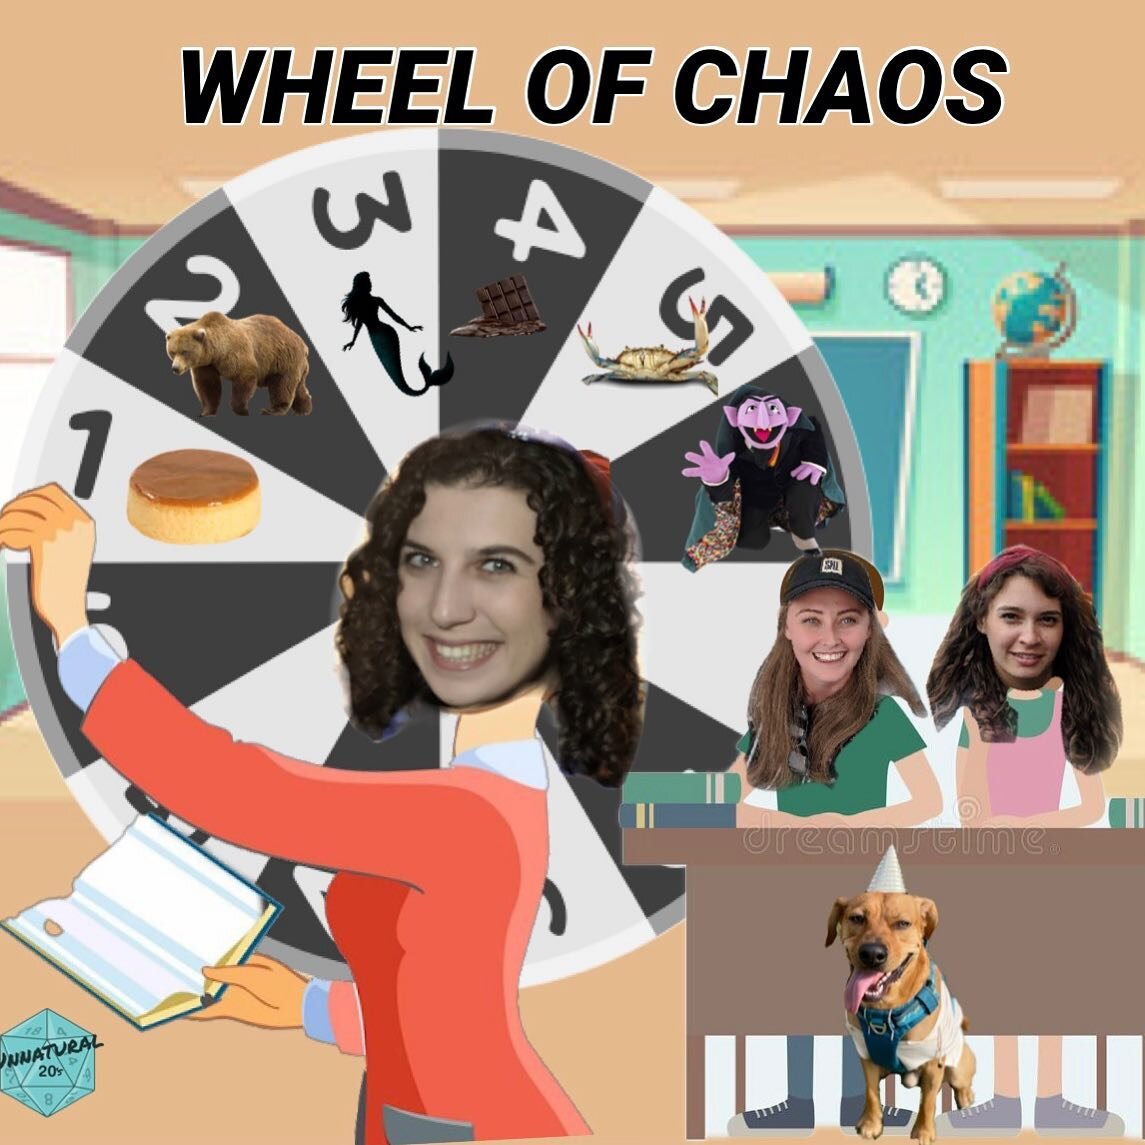 Ep 168 Wheel of Chaos 
We've been in this game for awhile now so the DM decided to keep us on our toes by making us play two games simultaneously! So be prepared for anything and join the party as we get a belly full of dirt, fuel up to dropkick, fin